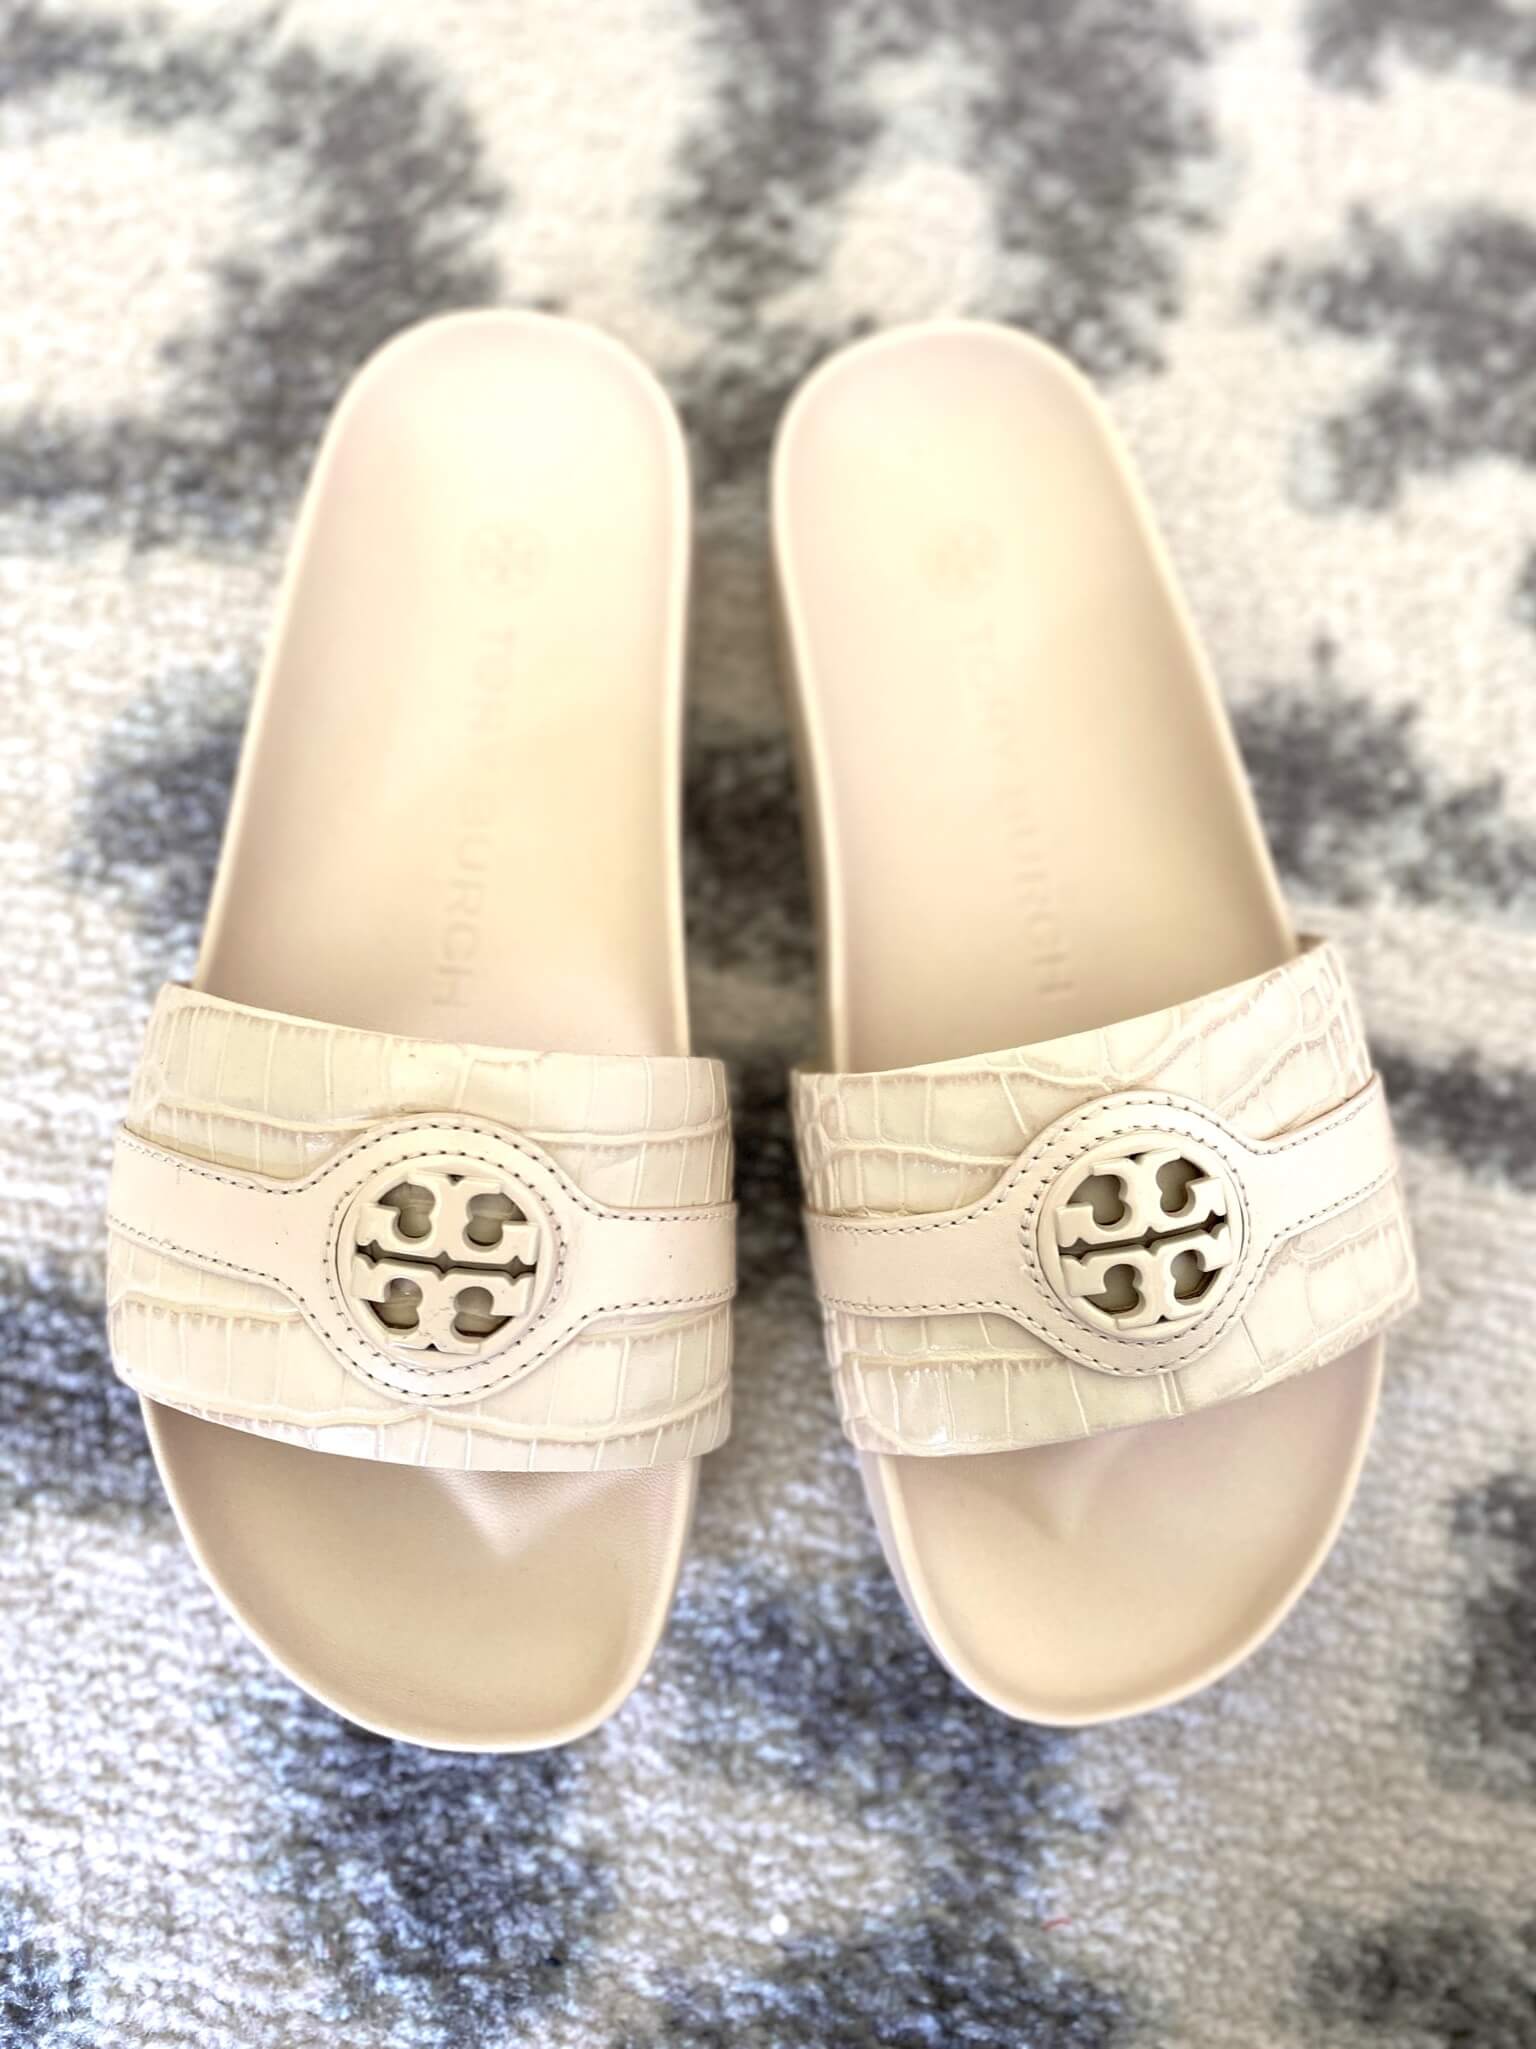 Tory Burch Giveaway + Our 40 Favorite In Stock NSALE Items For Open Access  Day! - The Double Take Girls